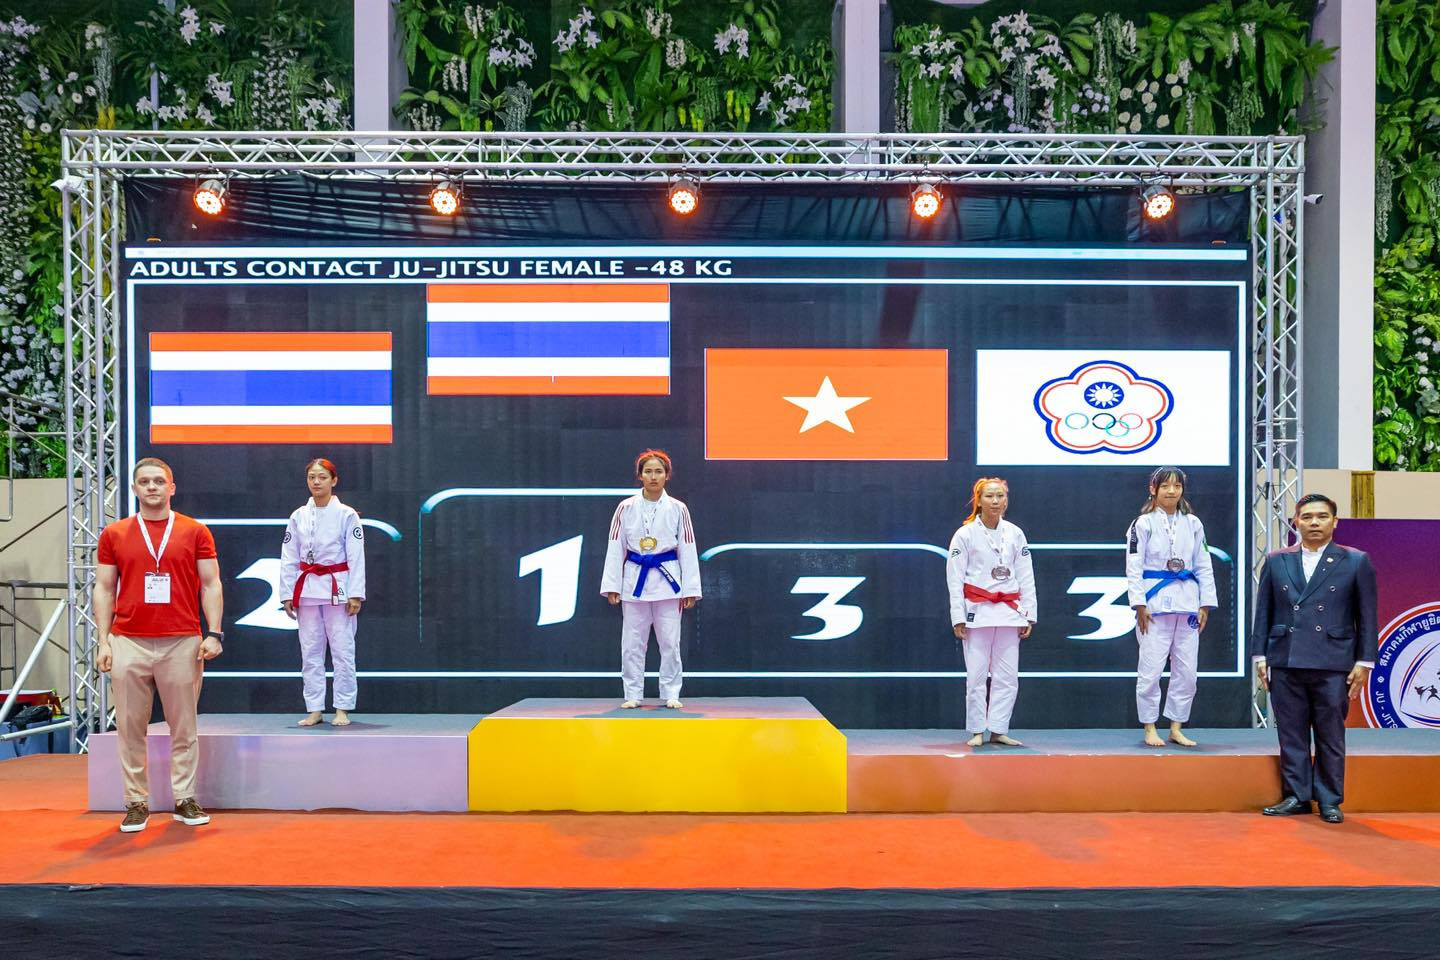 The host country secured their first gold of the day courtesy of Paweena Phalakan who beat compatriot Nutchaya Sugun in the women's under-45-kilograms final ©JJAU